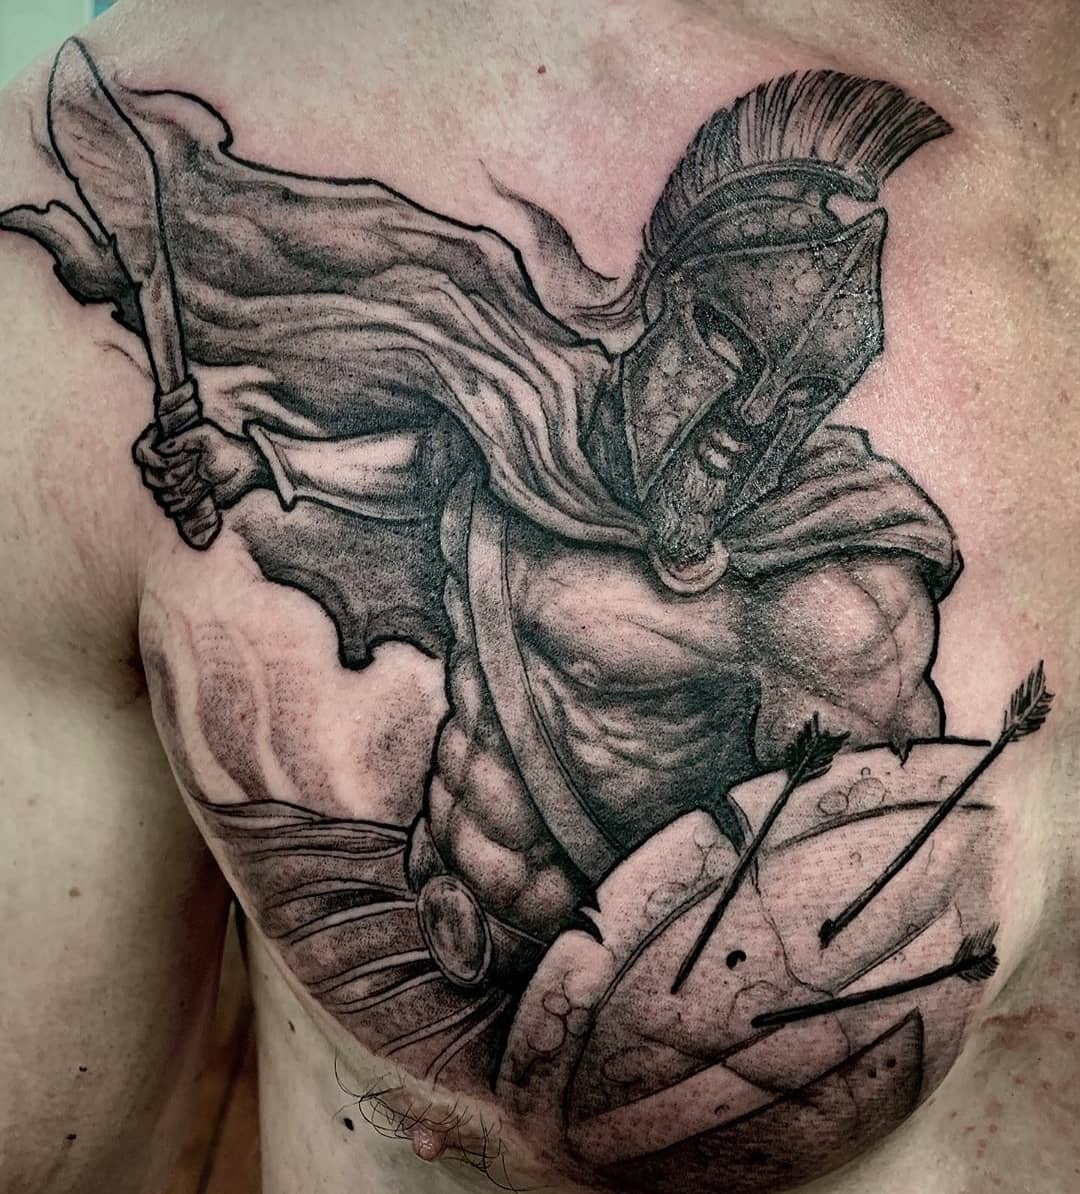 Let you true warrior shine with a Spartan tattoo like the one above.